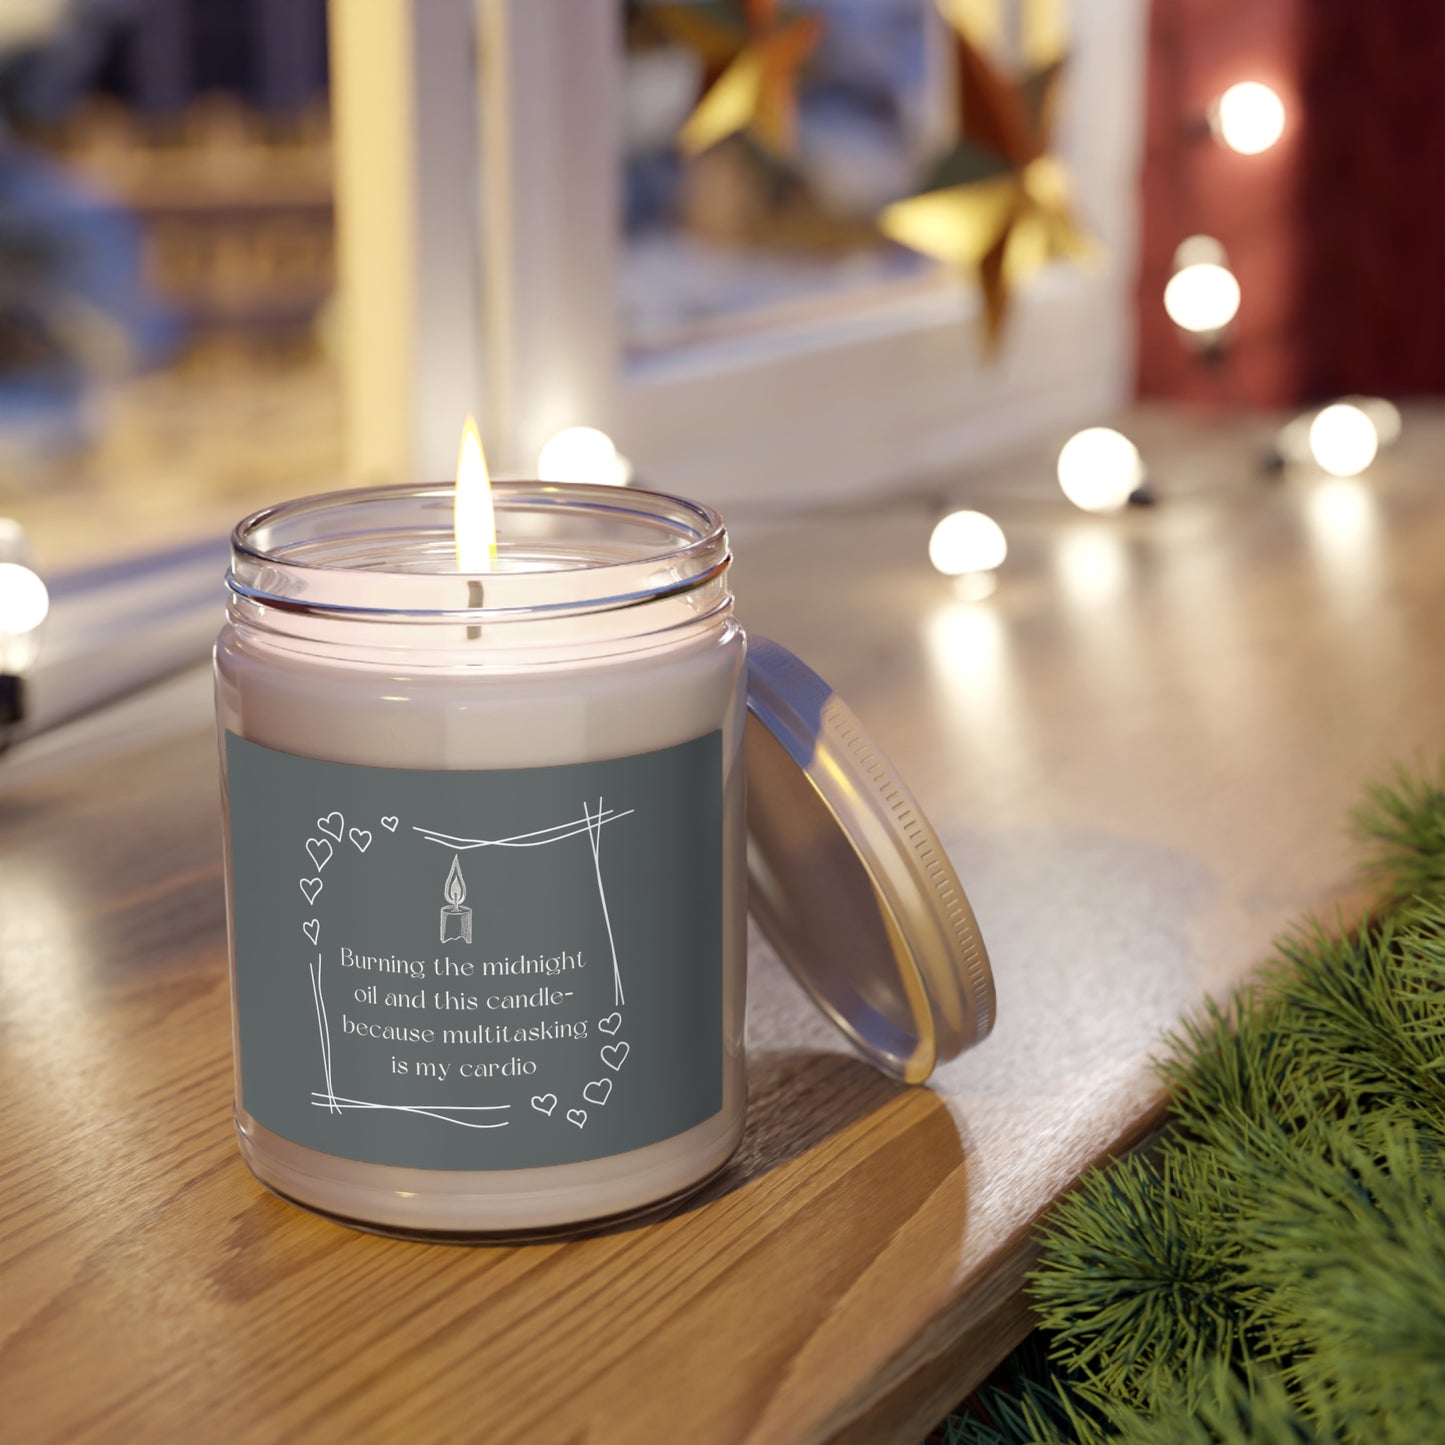 Burning the midnight oil and this candle—because multitasking is my cardio Scented Candles, 9oz